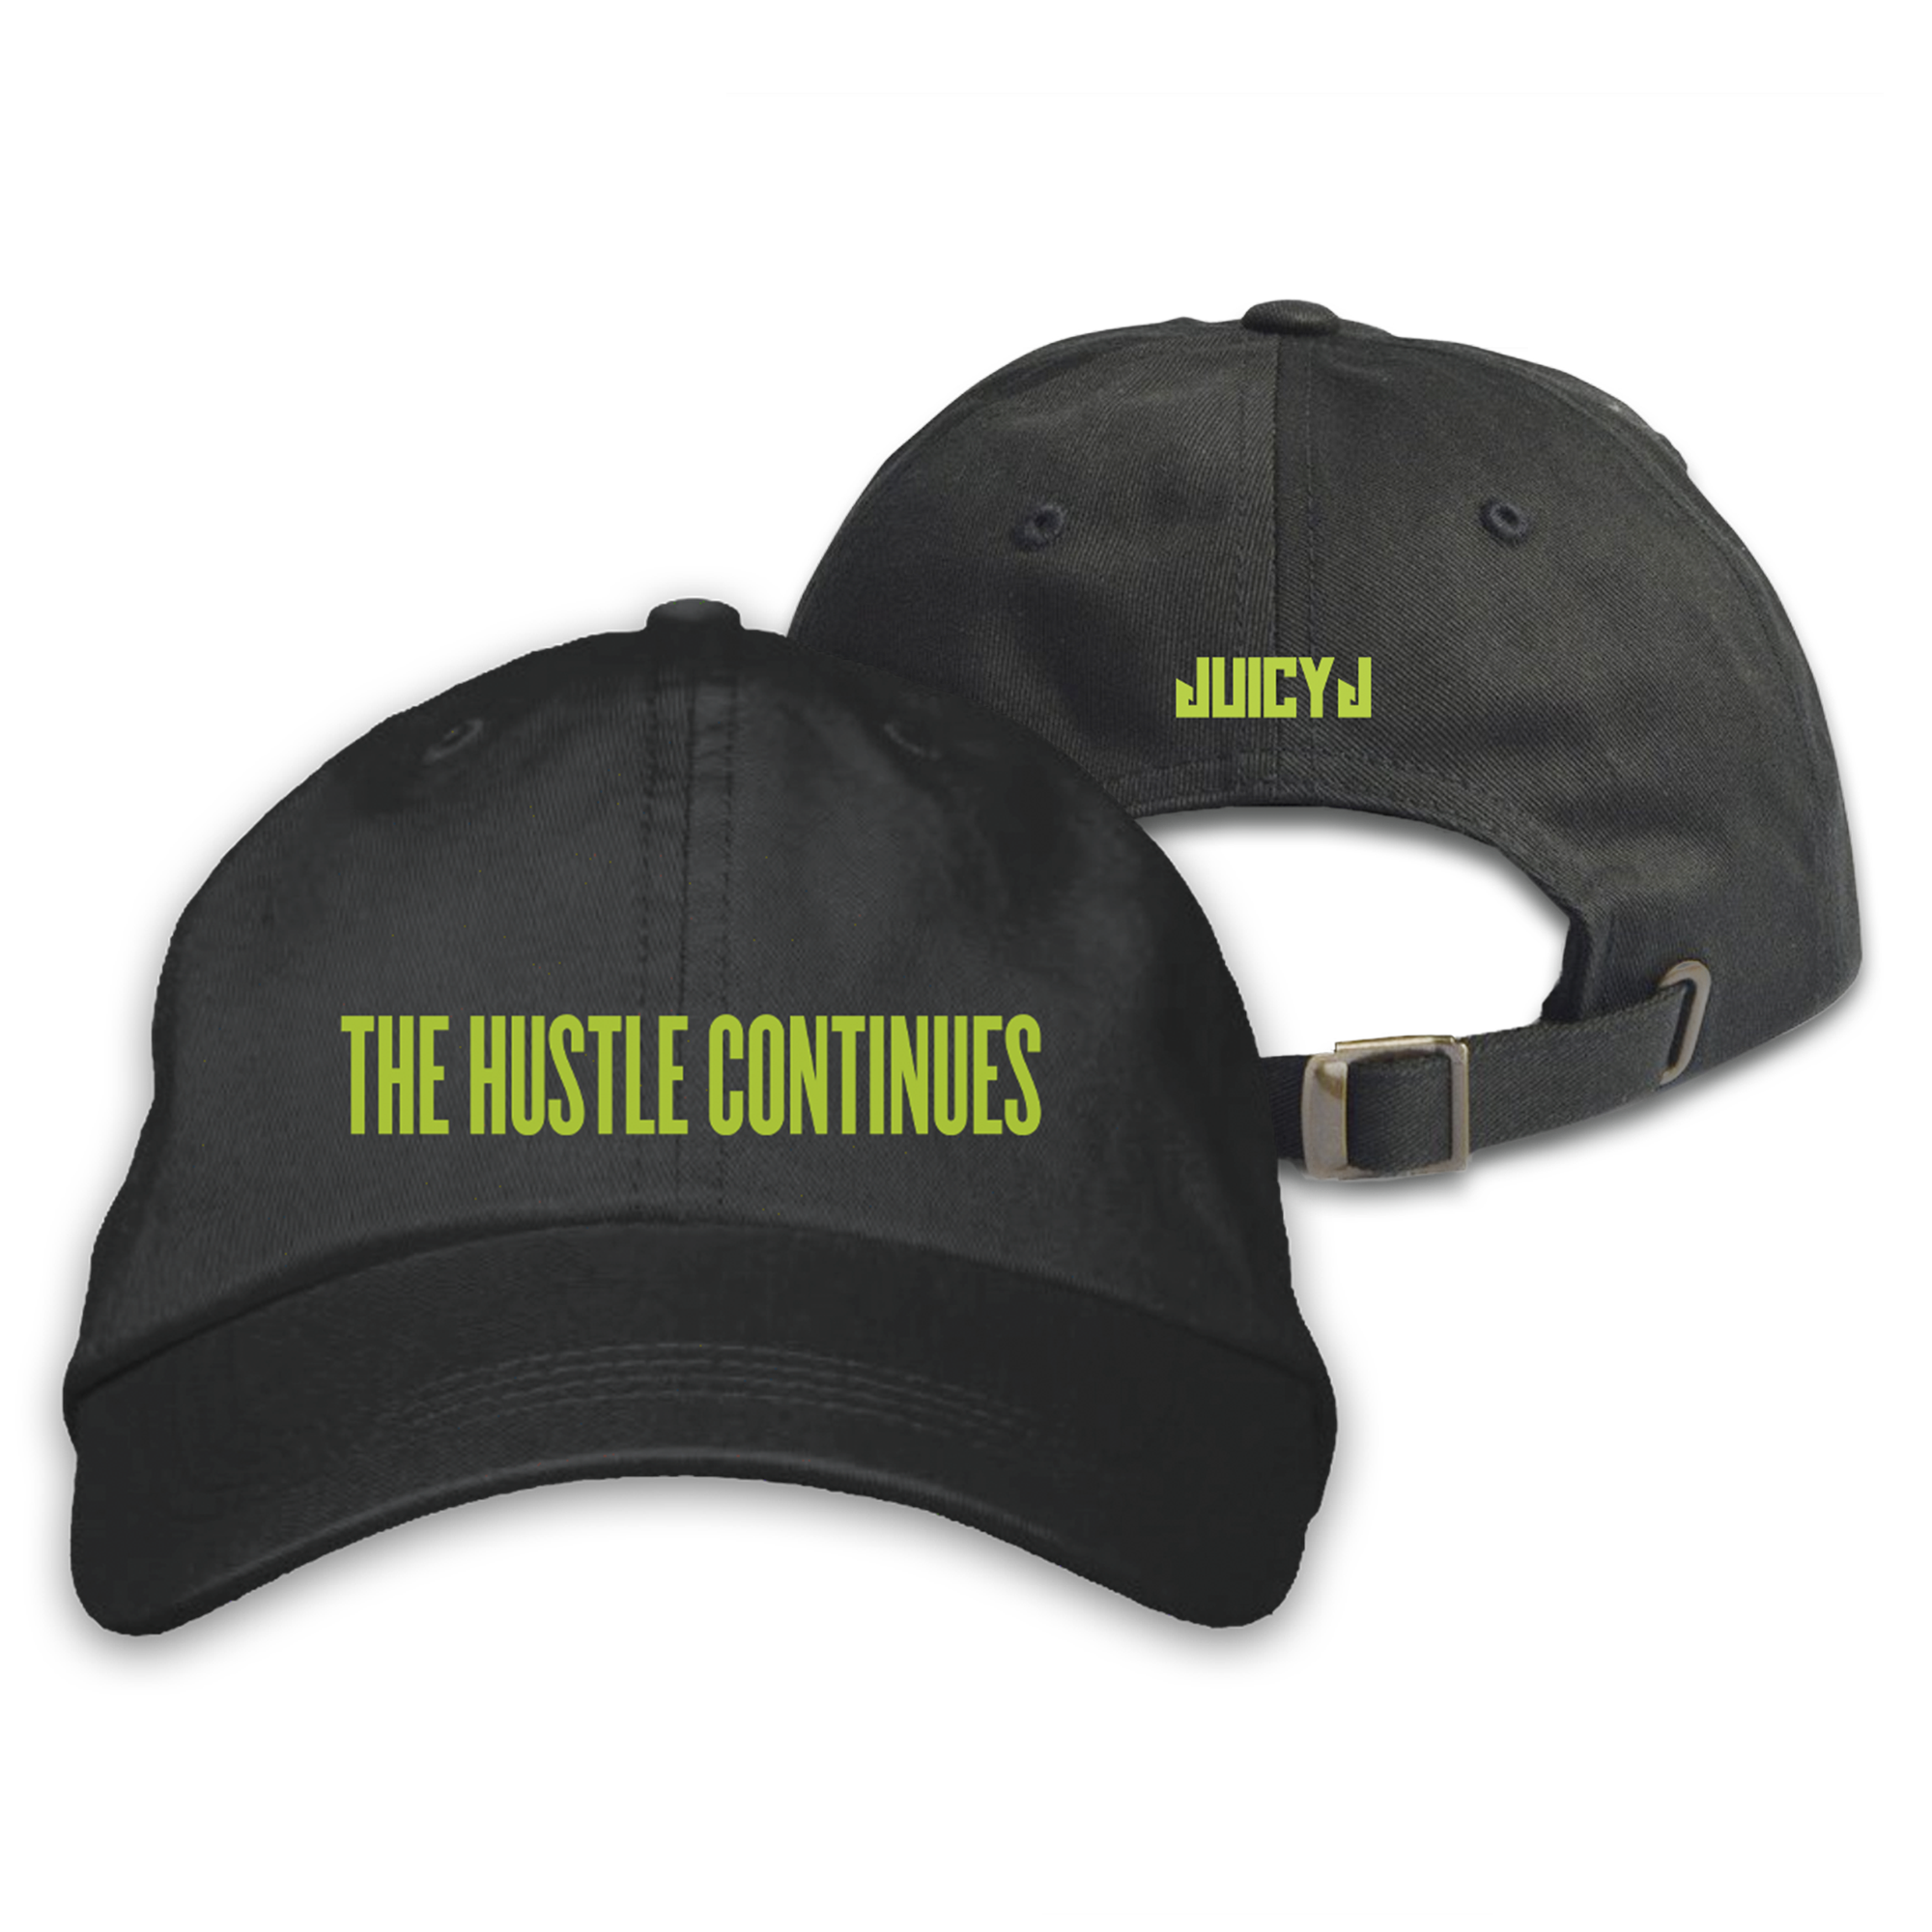 Juicy J - The Hustle Continues Green Print Dad Hat